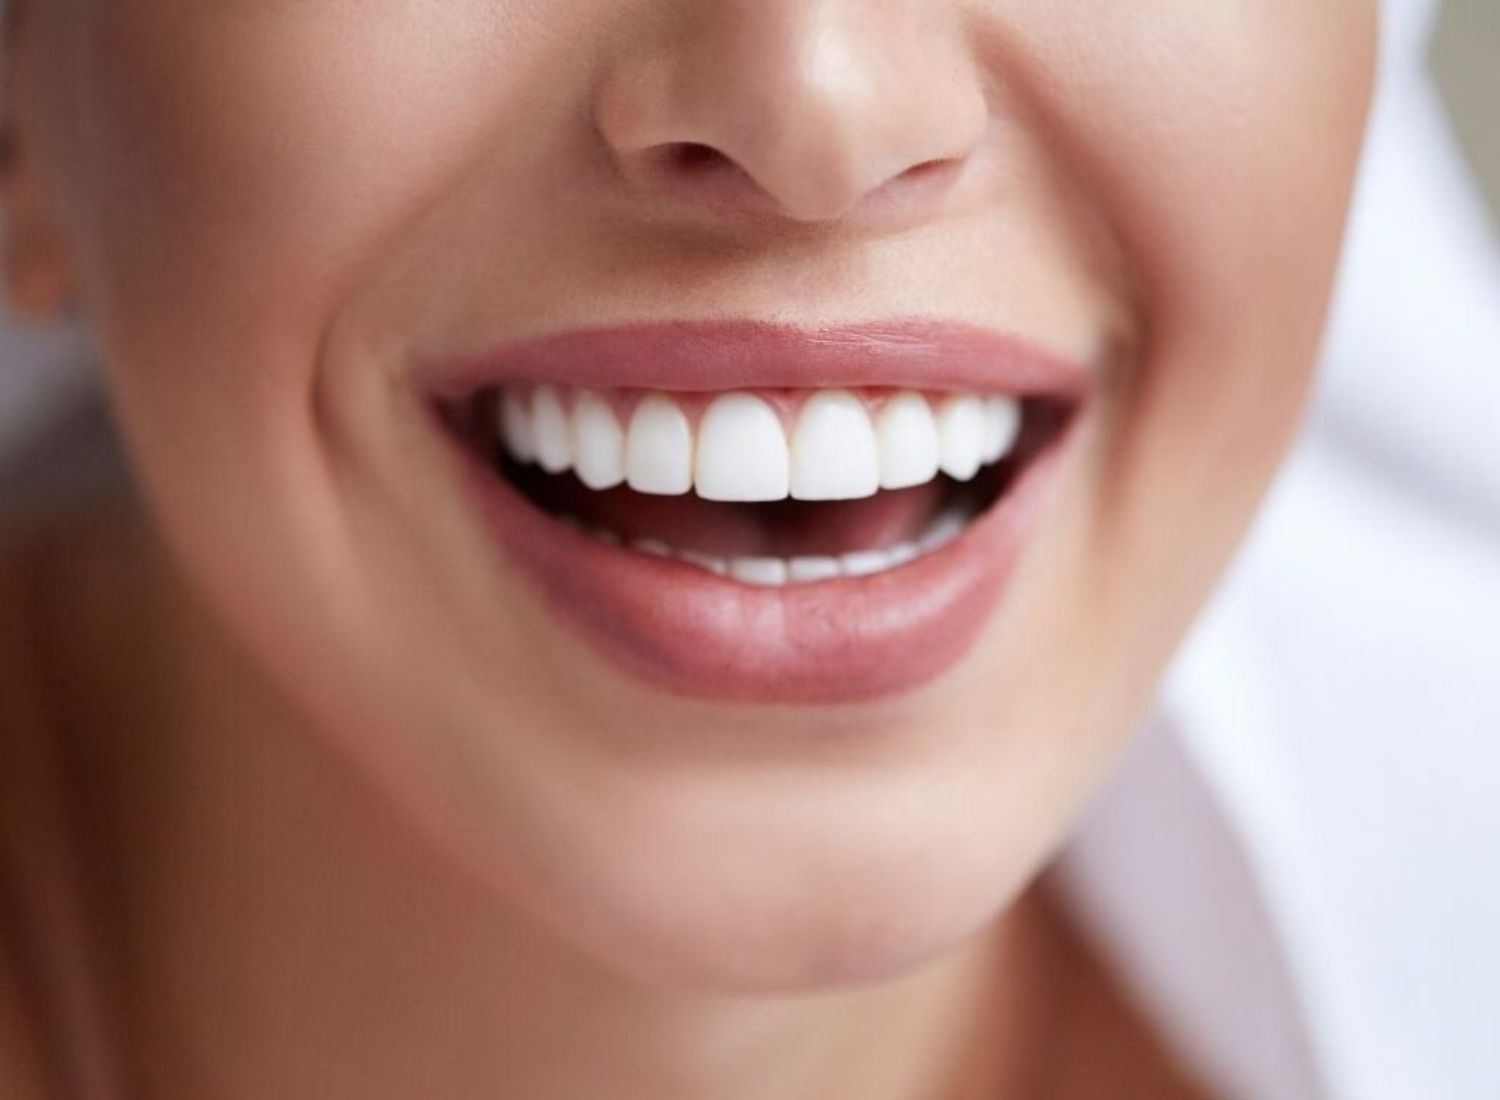 Facts You Should Know About Your Teeth